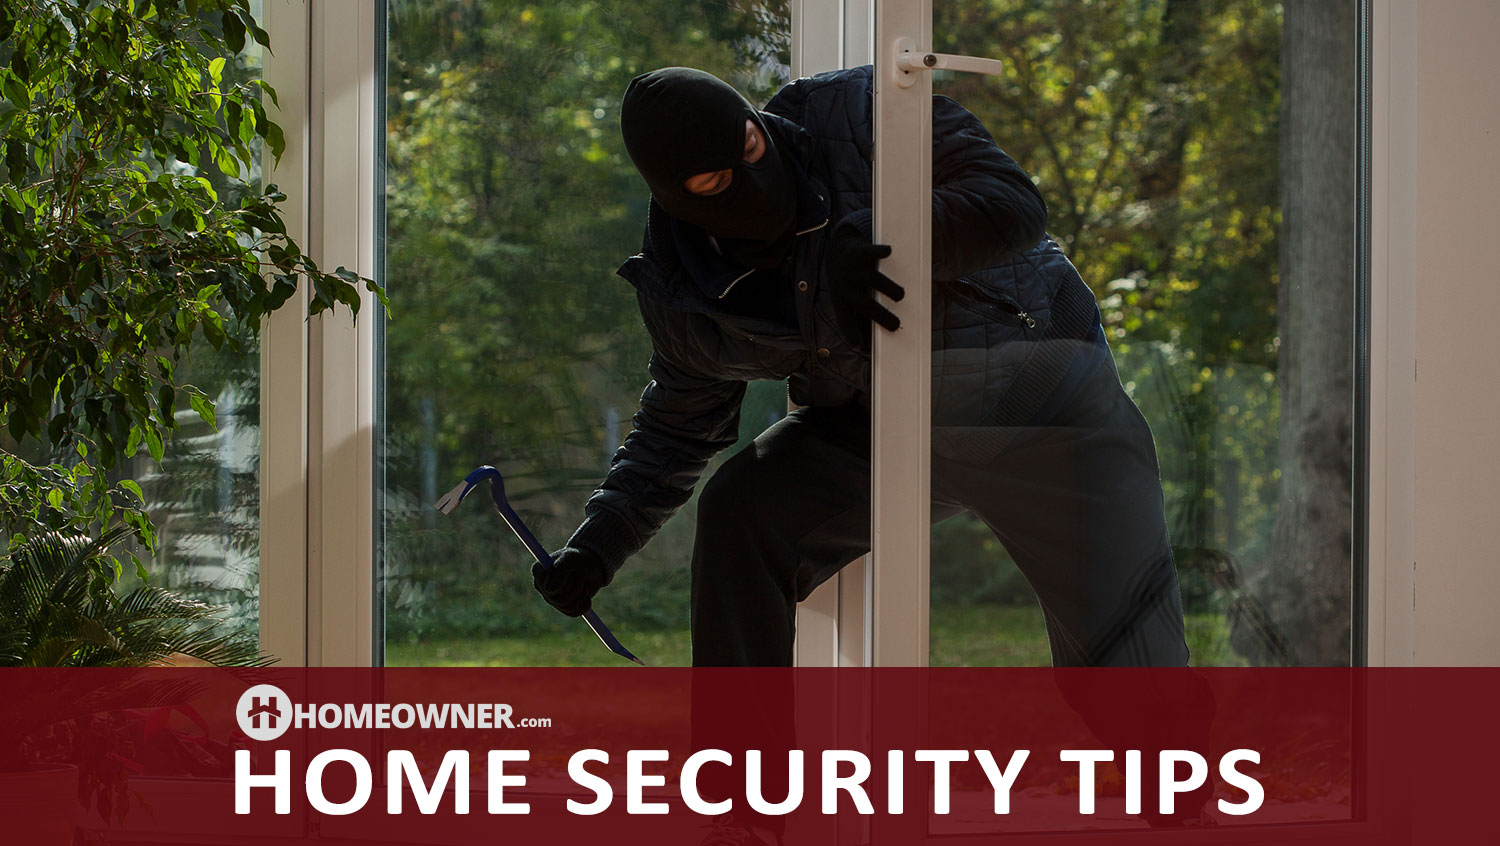 14 Home Security Tips To Prevent Break-Ins